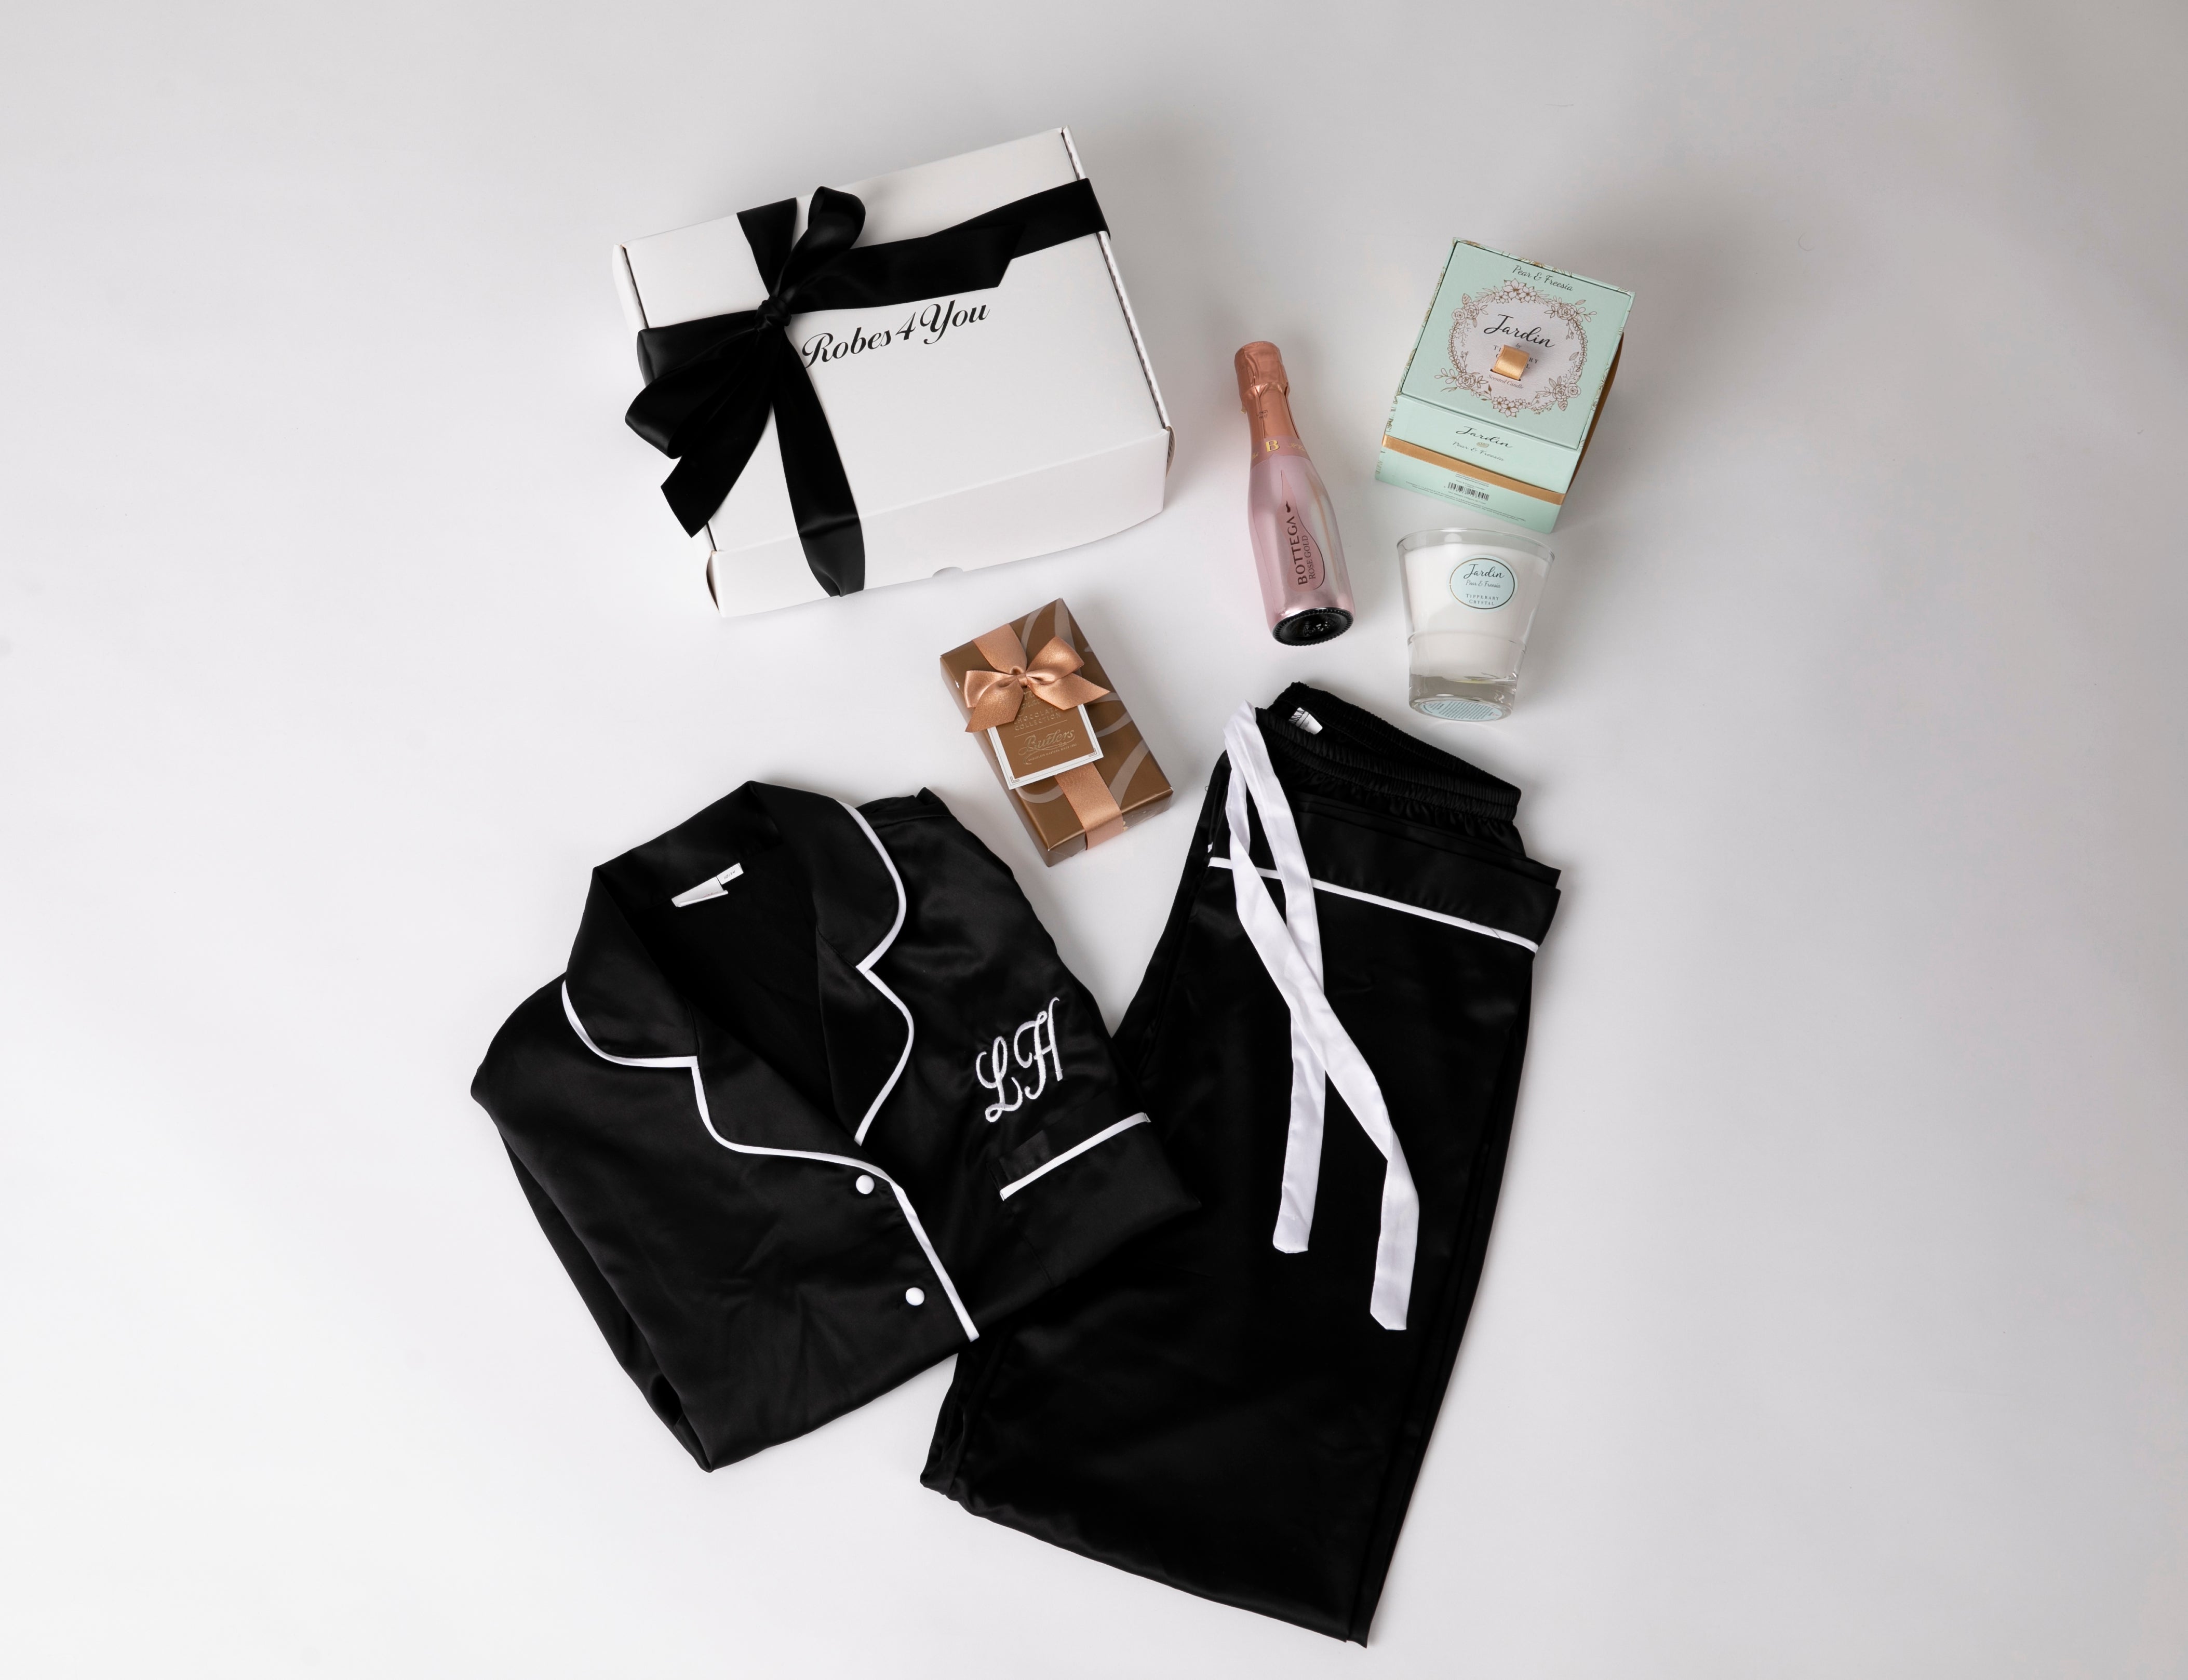 Personalised Black Satin Pjs with white Piping and snippet of champagne, candle and chocolates  presented in a gift box with bow